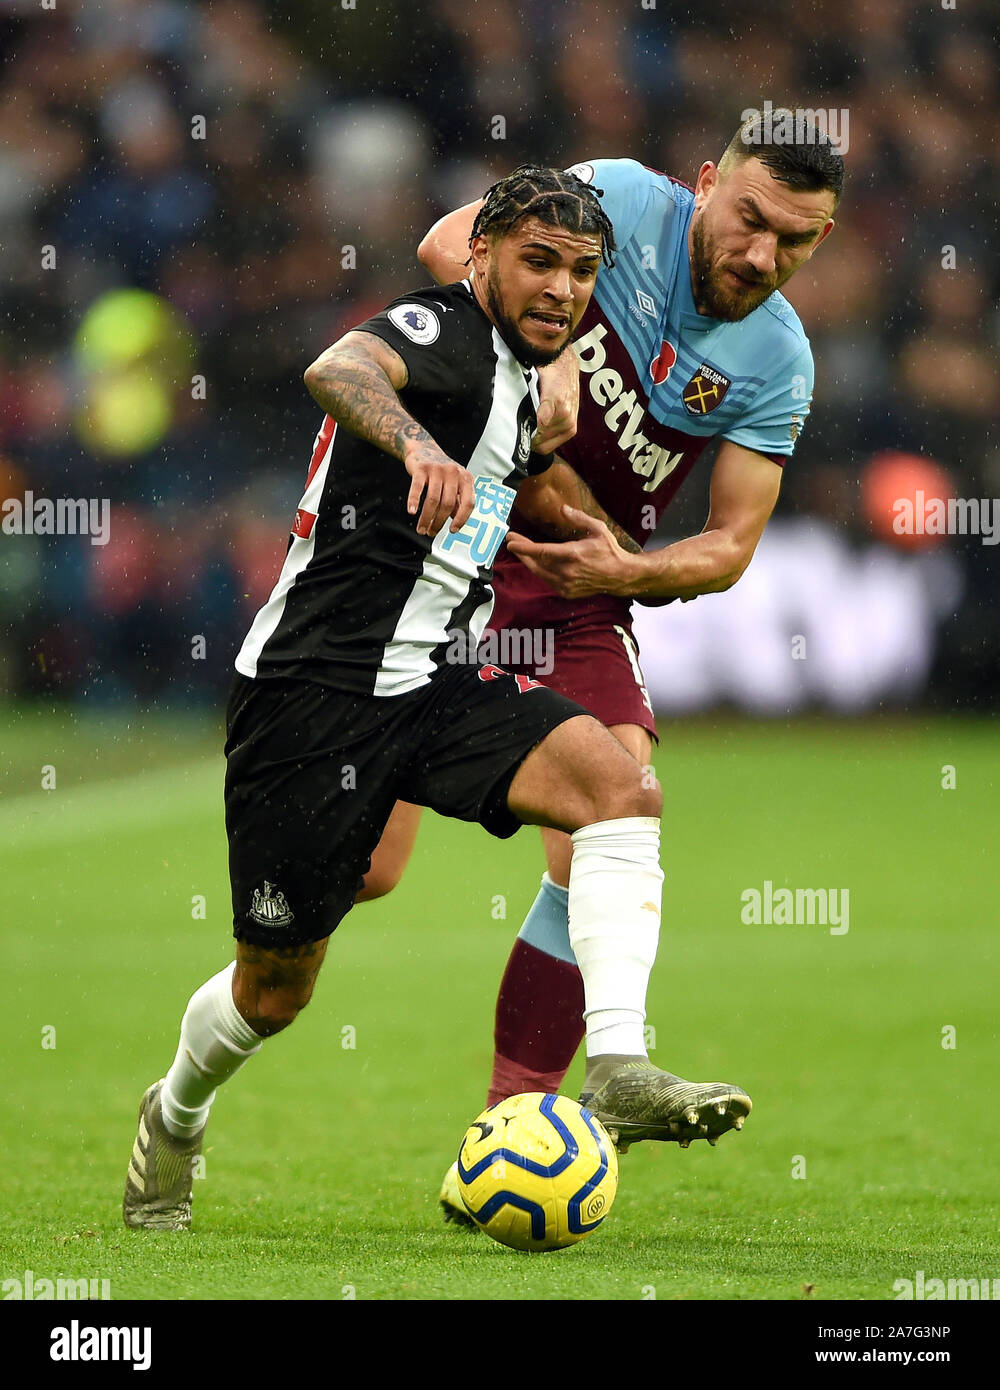 Newcastle United's DeAndre Yedlin (left) and West Ham United's Robert Snodgrass battle for the ball during the Premiership match at The London Stadium, London. Stock Photo